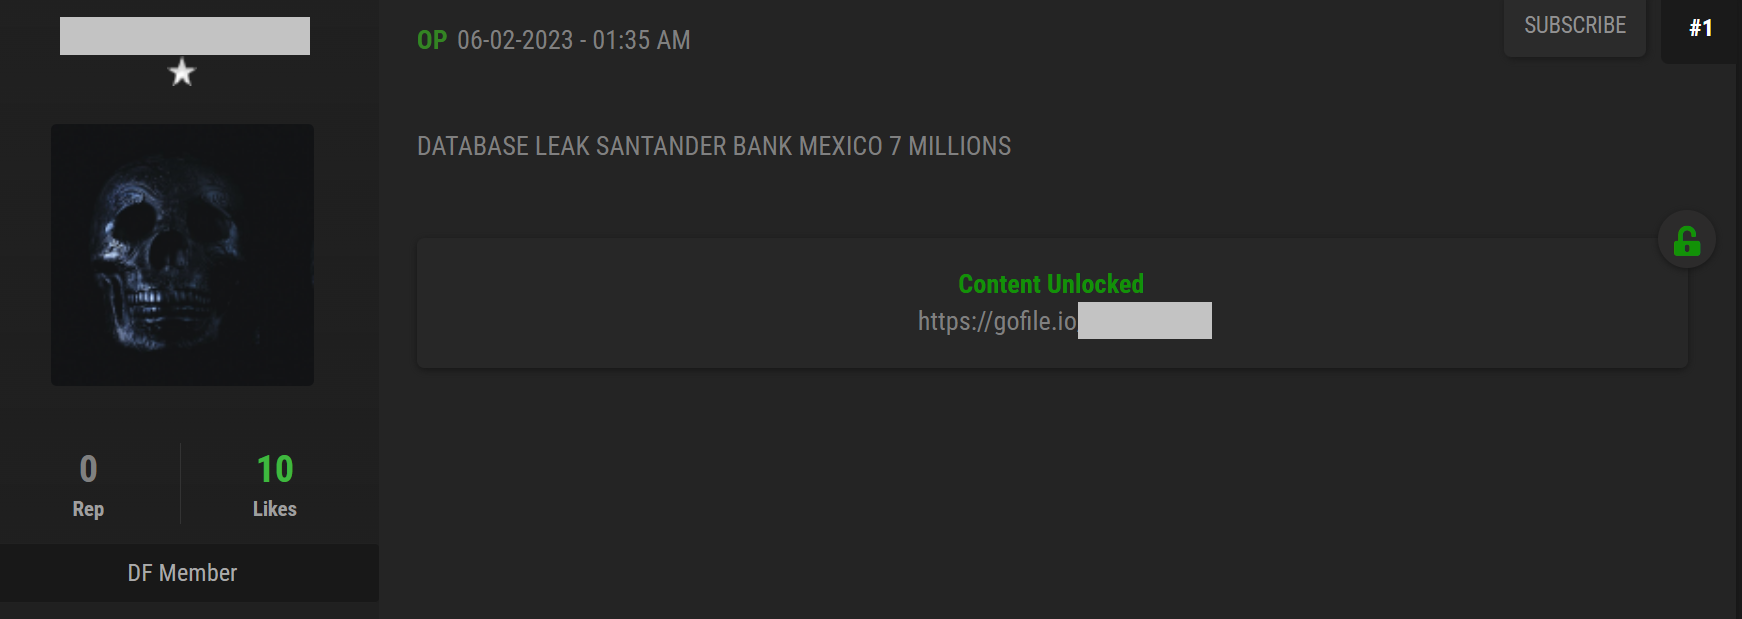 Giveaway of the leaked database of a Mexican bank